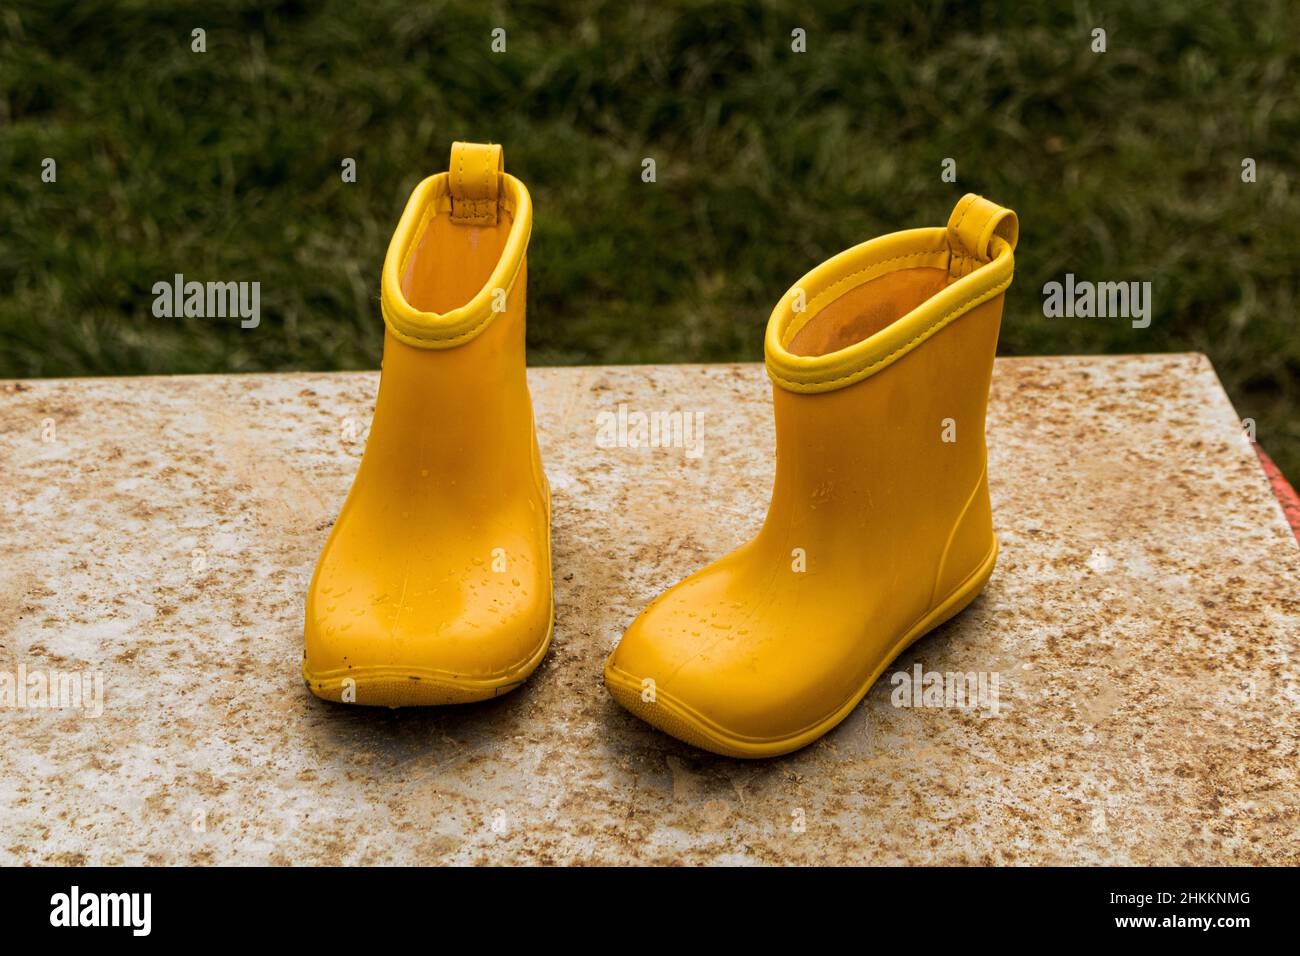 Close-up shot of a yellow welly boots for kids on a stone bench in the garden Stock Photo